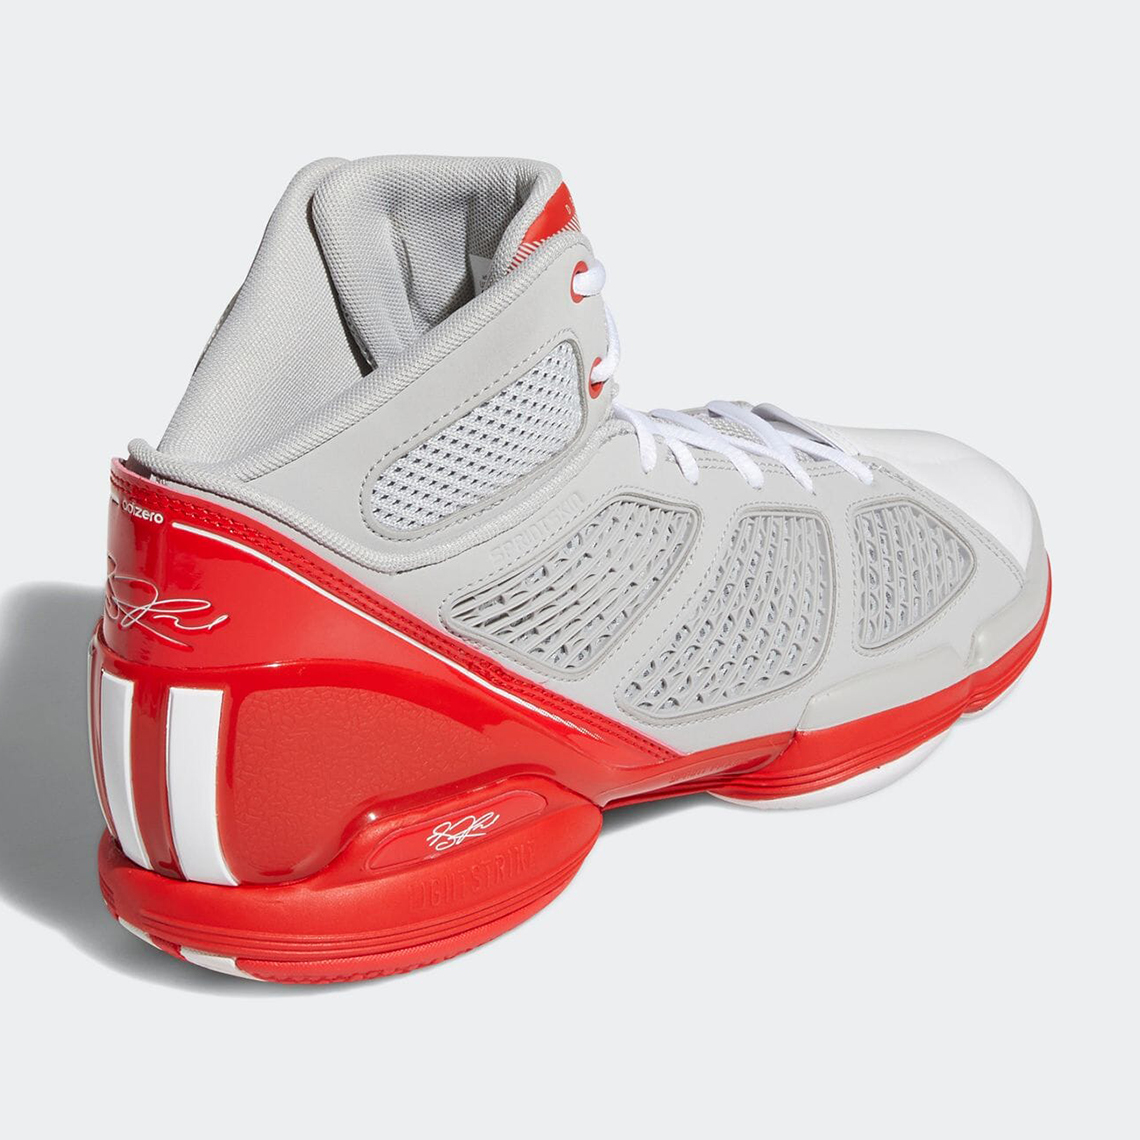 Adidas D Rose 1 5 White Grey Red Gy0257 4